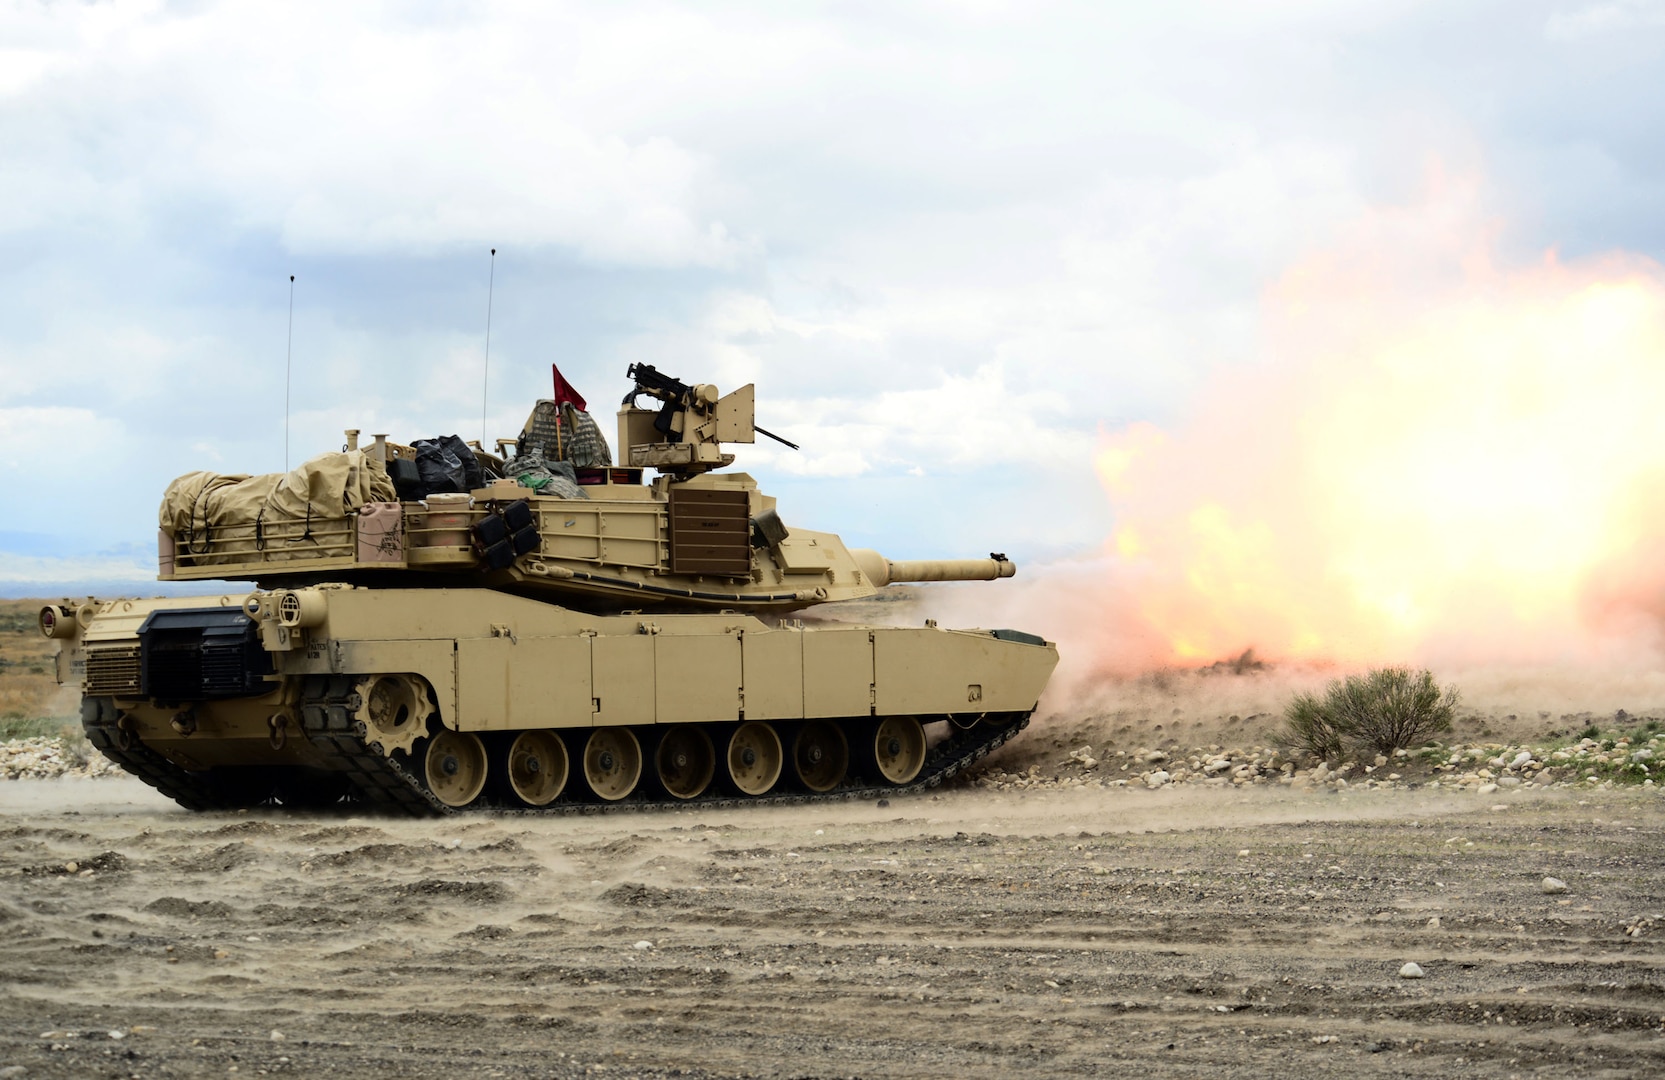 Oregon Army National Guard Soldiers with 3rd Battalion, 116th Cavalry Regiment, conduct live-fire gunnery training with M1A2 SEP V2 Abrams main battle tanks, April 17, 2018, at the Orchard Combat Training Center near Boise, Idaho.